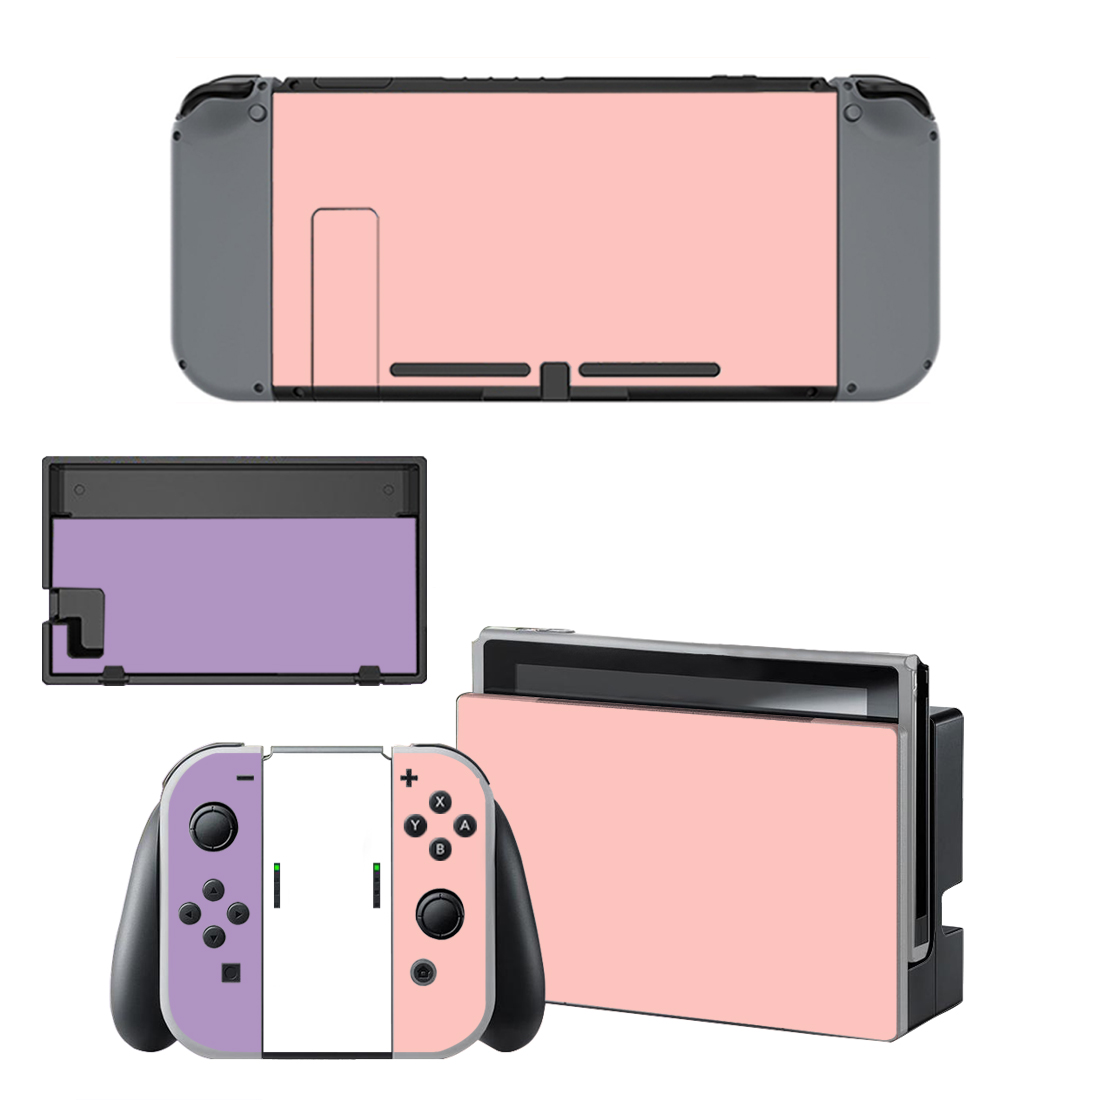 Pure Color Pink Skin Sticker For Nintendo Switch 